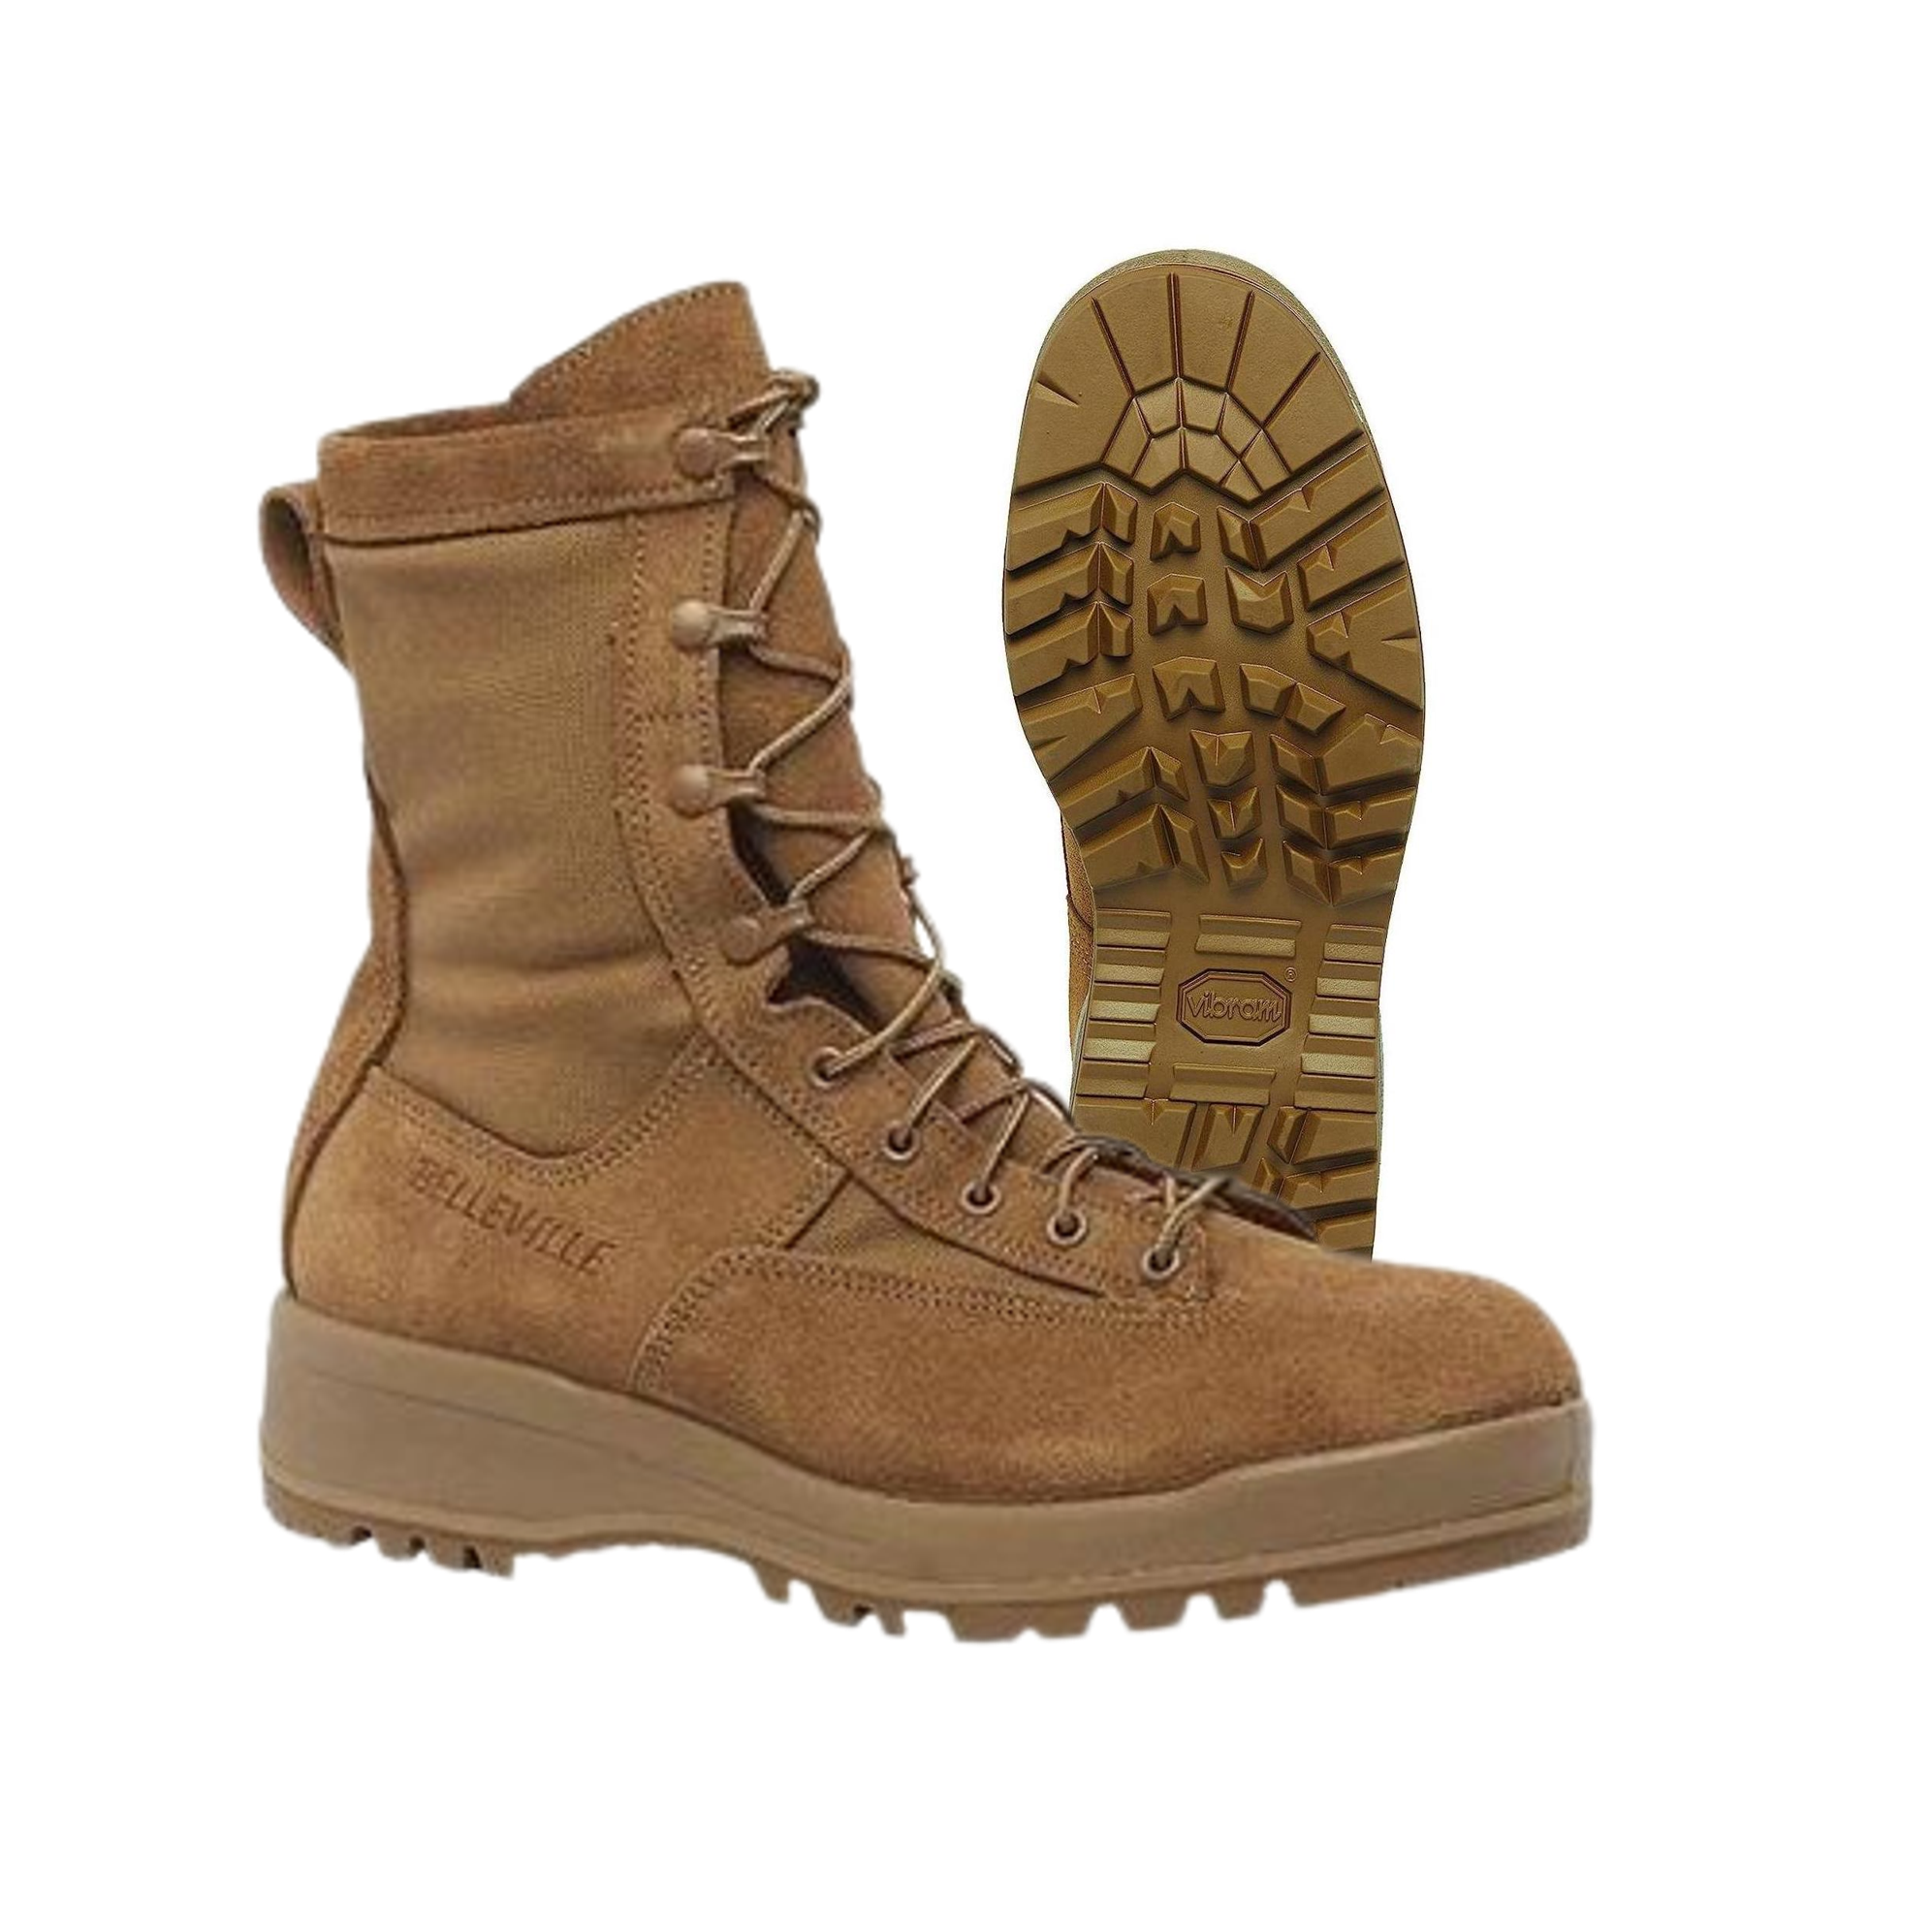 This image portrays Belleville C790 Waterproof Flight & Combat Boot by Government Suppliers & Associates.